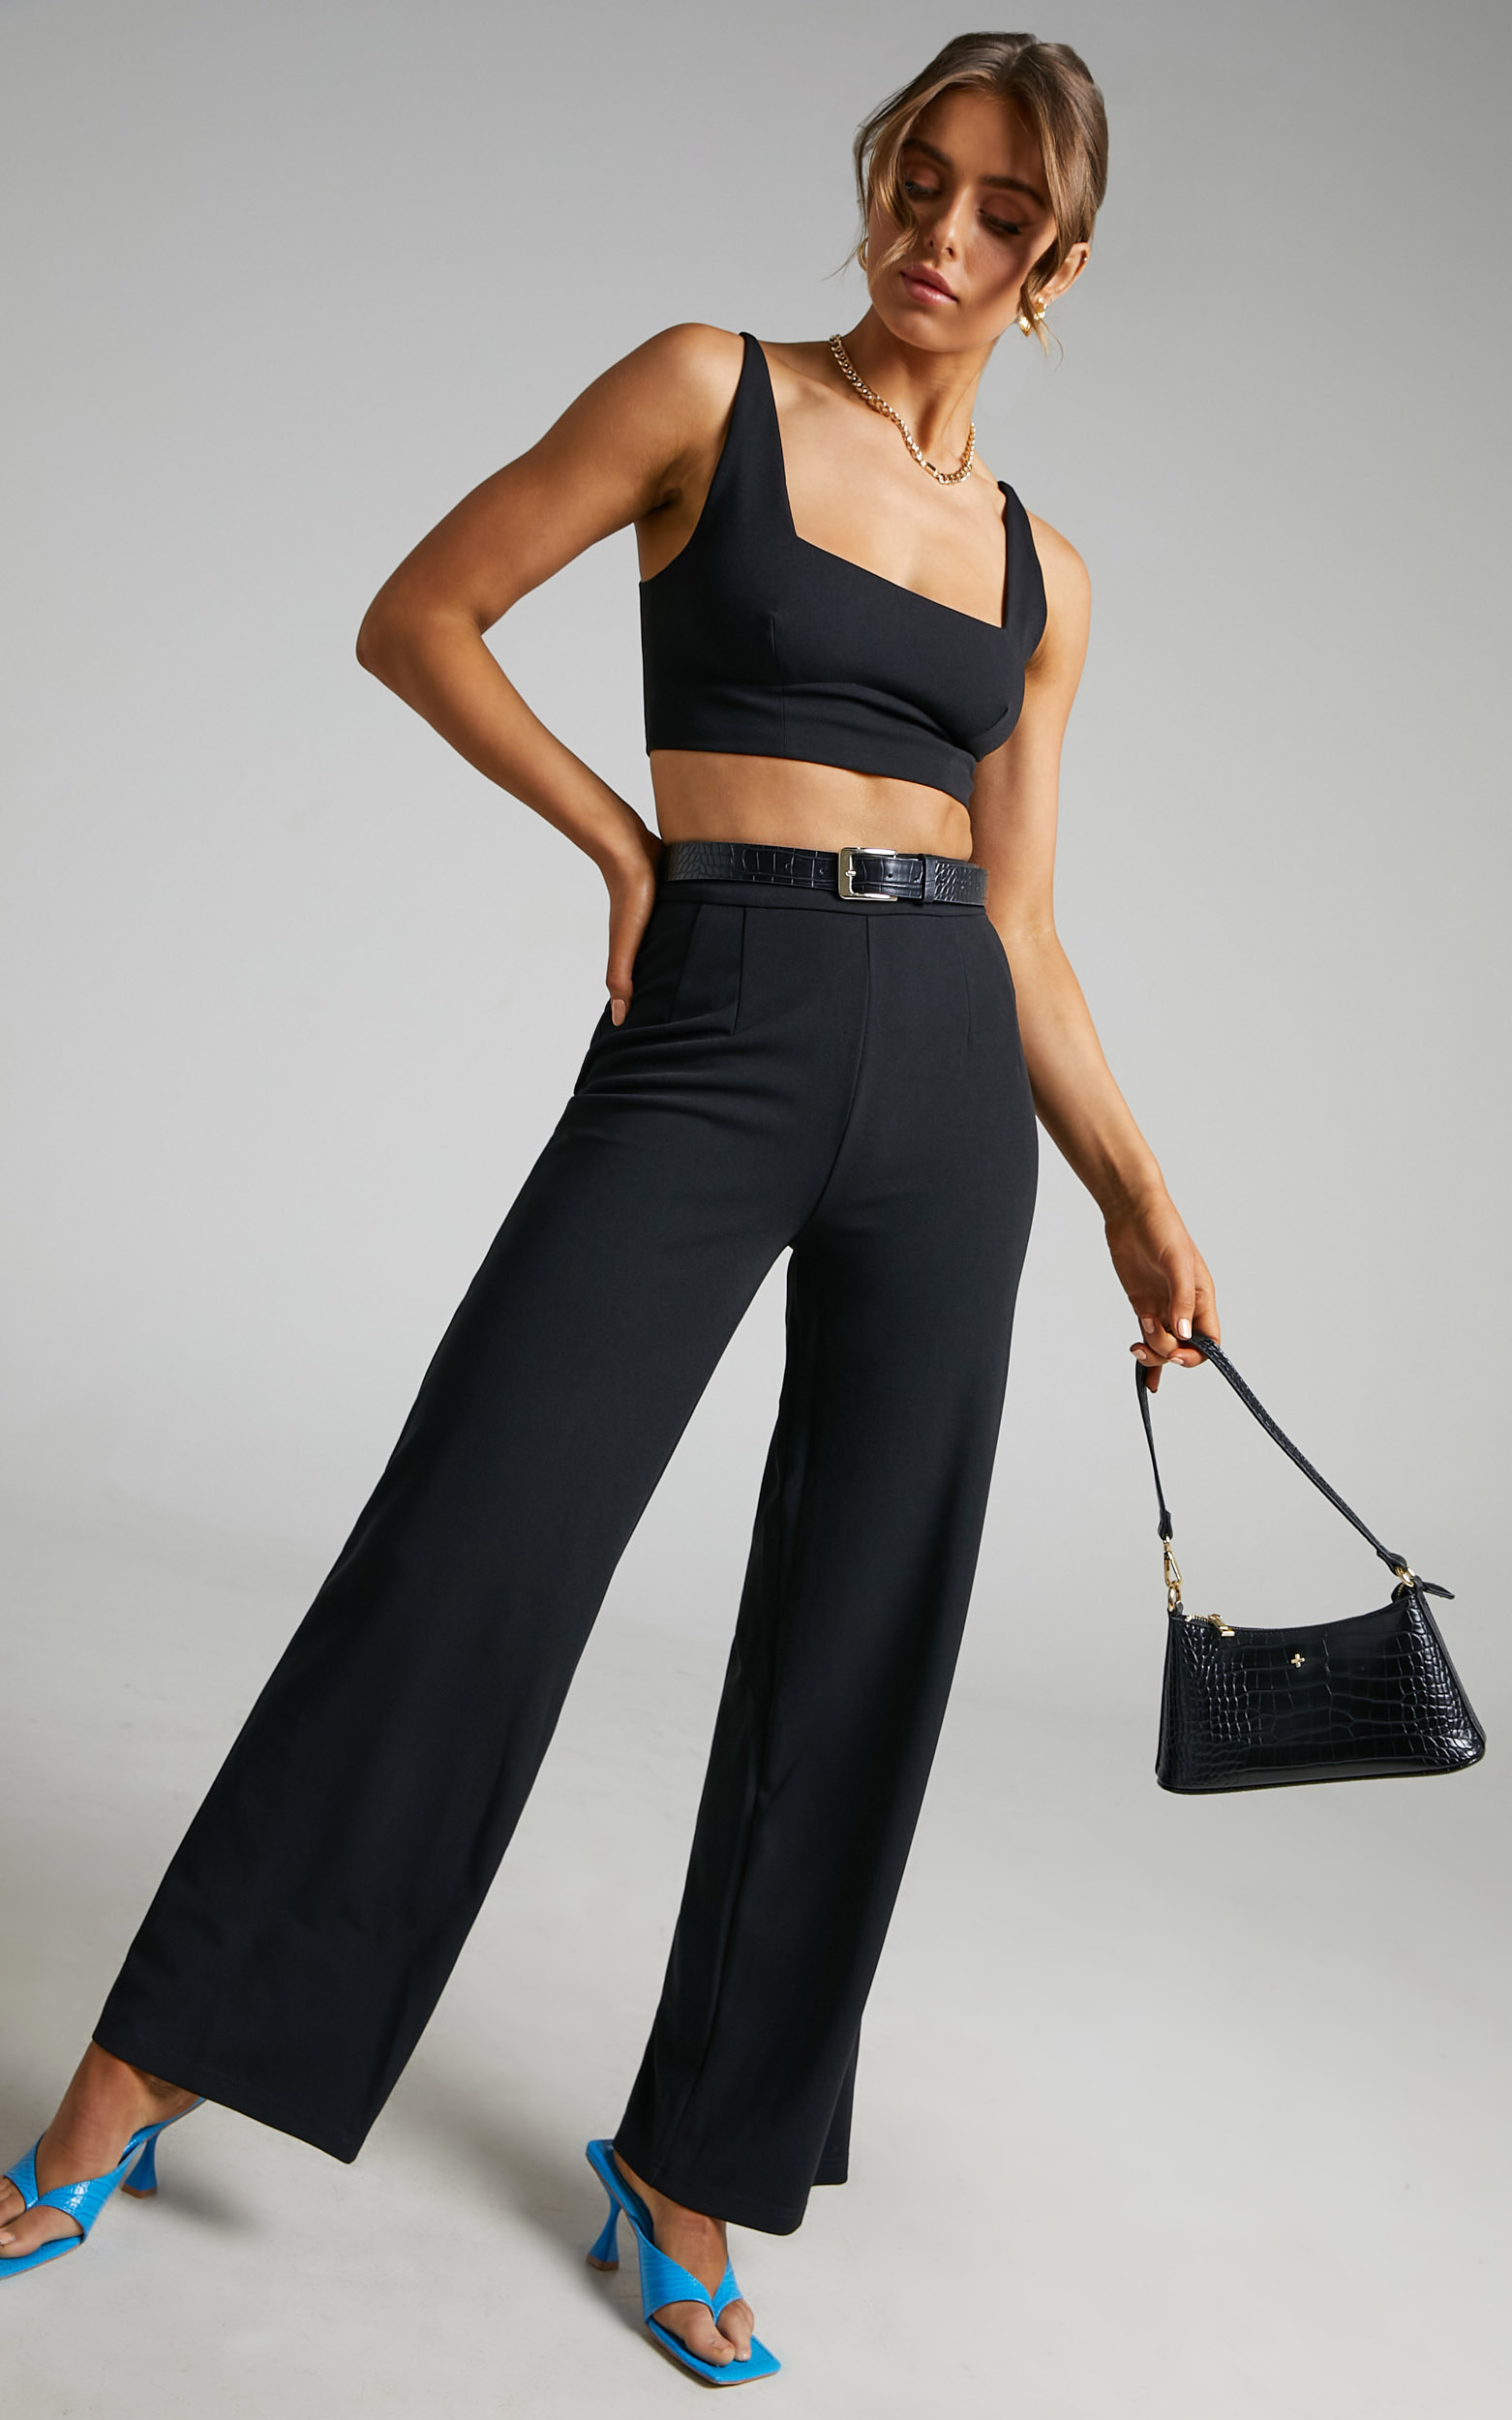 Elibeth Two Piece Set - Crop Top and High Waisted Wide Leg Pants in Black - 04, BLK1, hi-res image number null